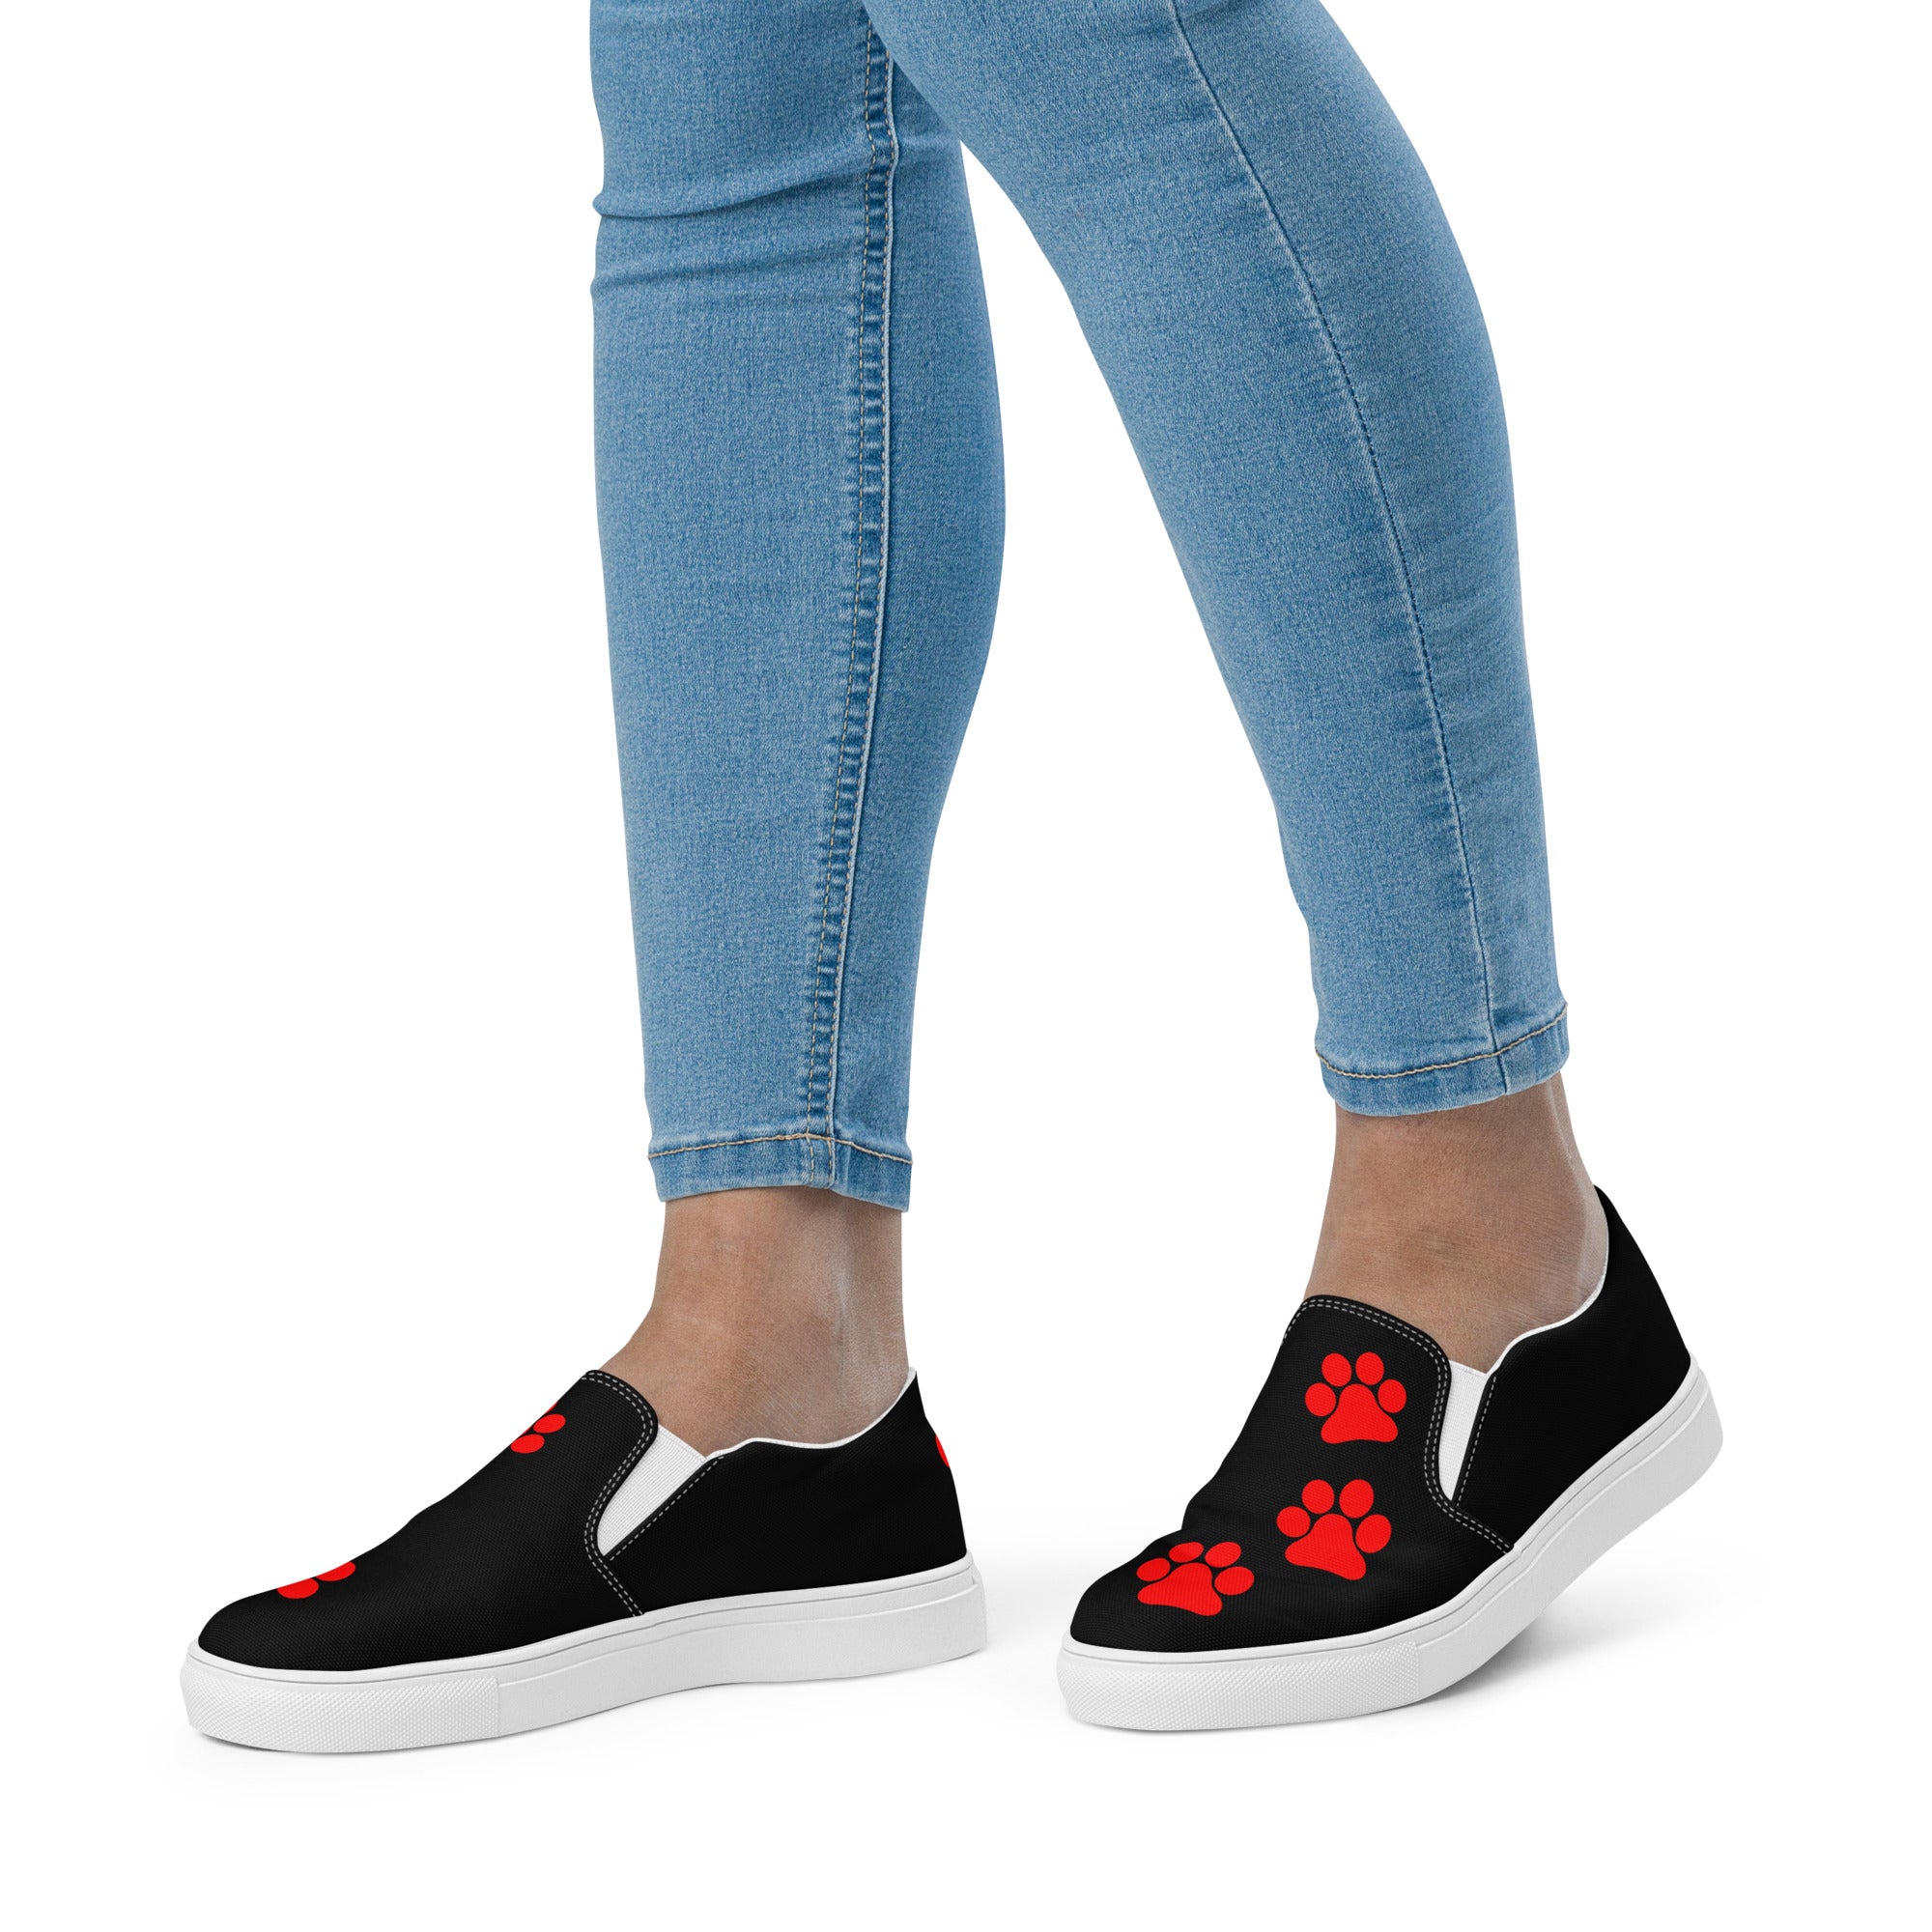 Women’s slip-on Black Red Paw shoes